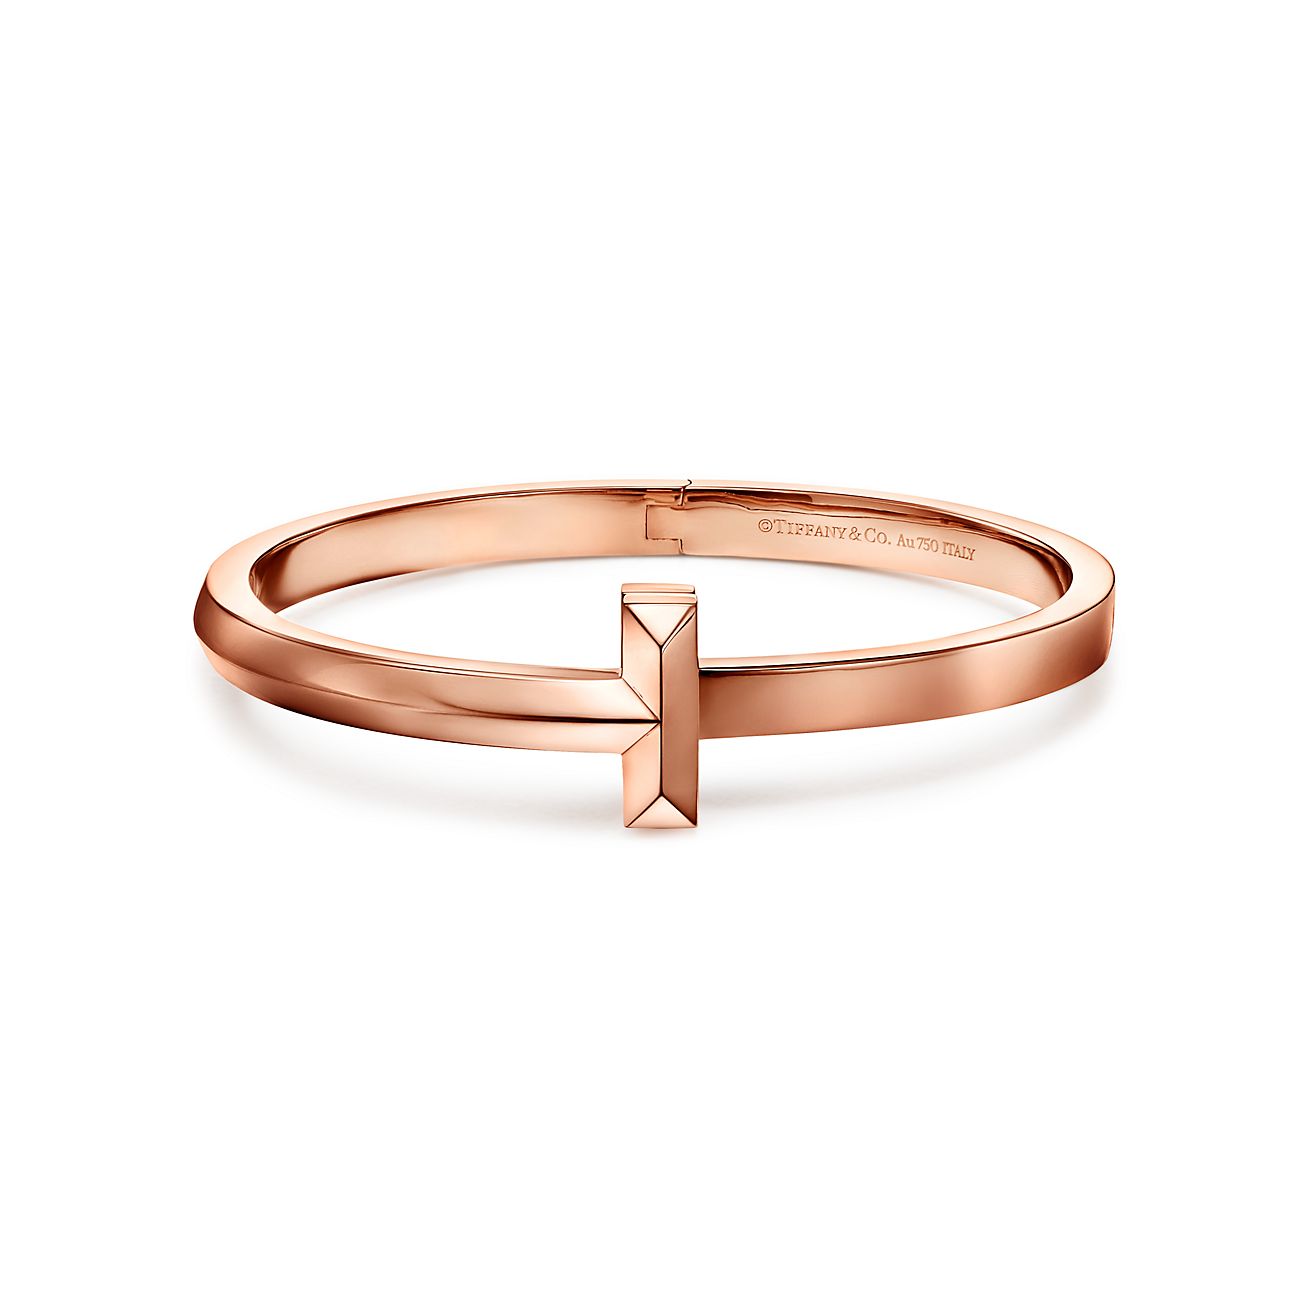 Tiffany T T1 wide hinged bangle in 18k 